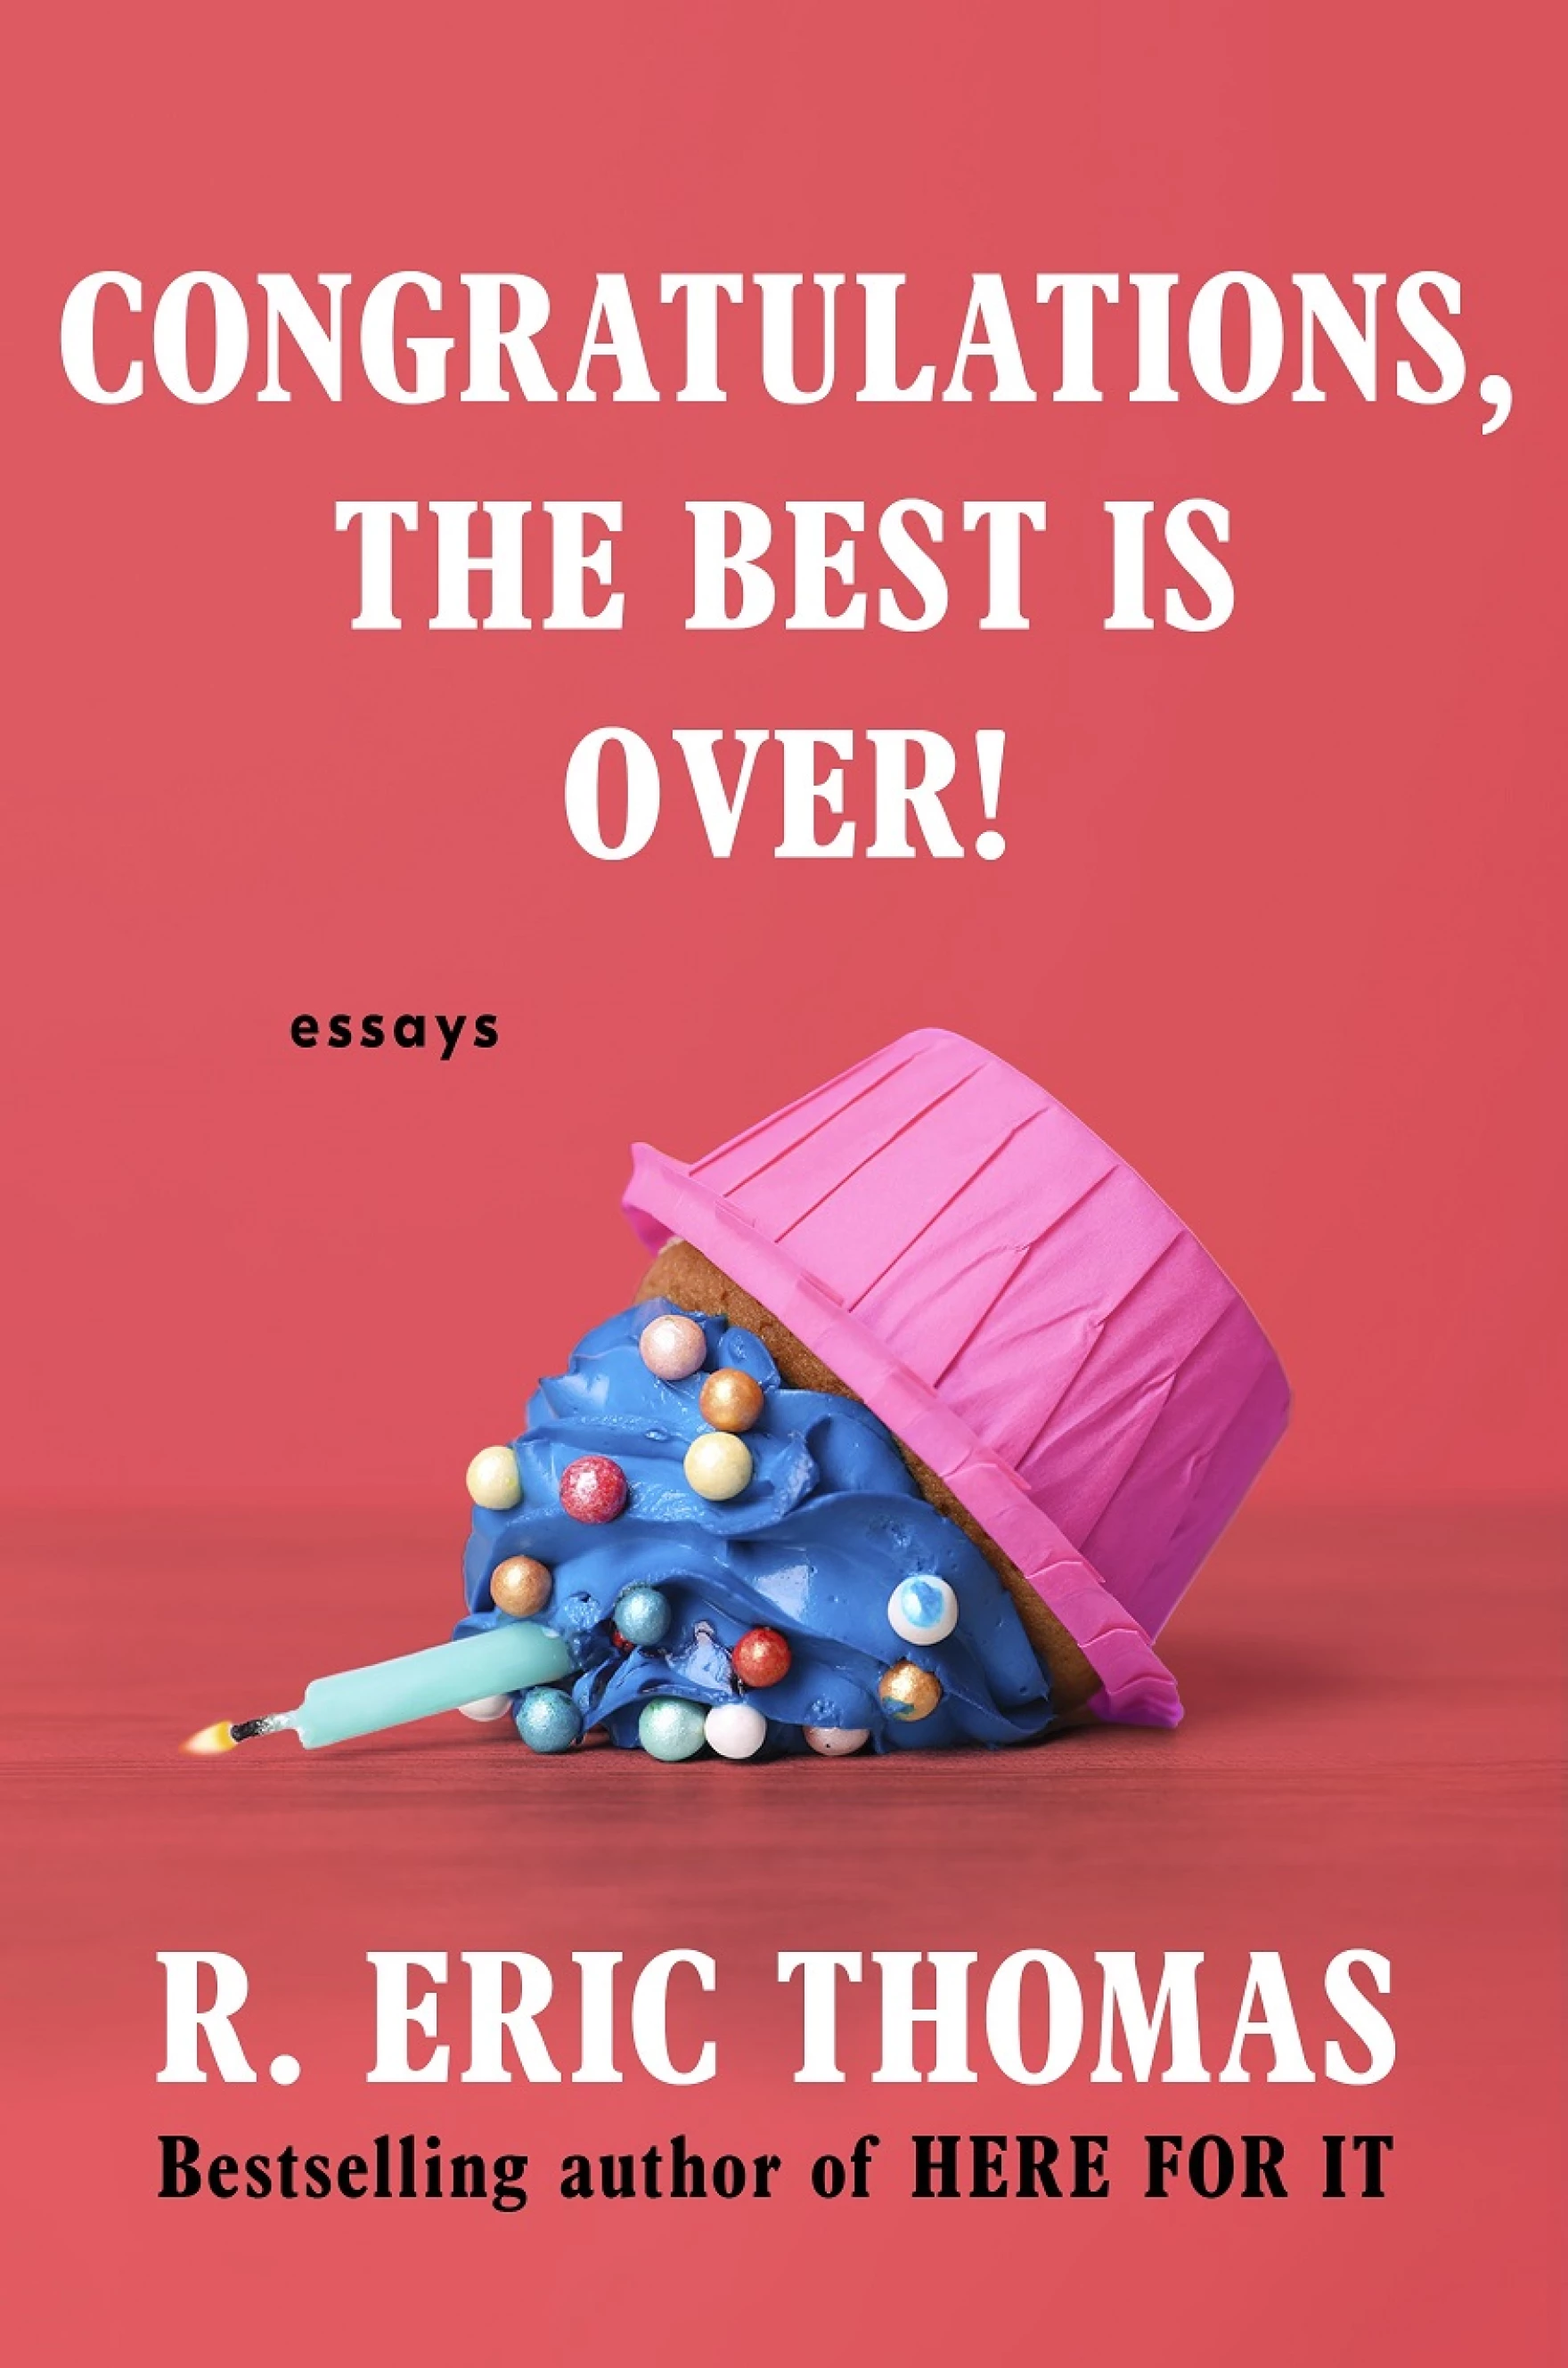 R. Eric Thomas writes with humor and wit in his latest book, 'Congratulations, the Best is Over!'